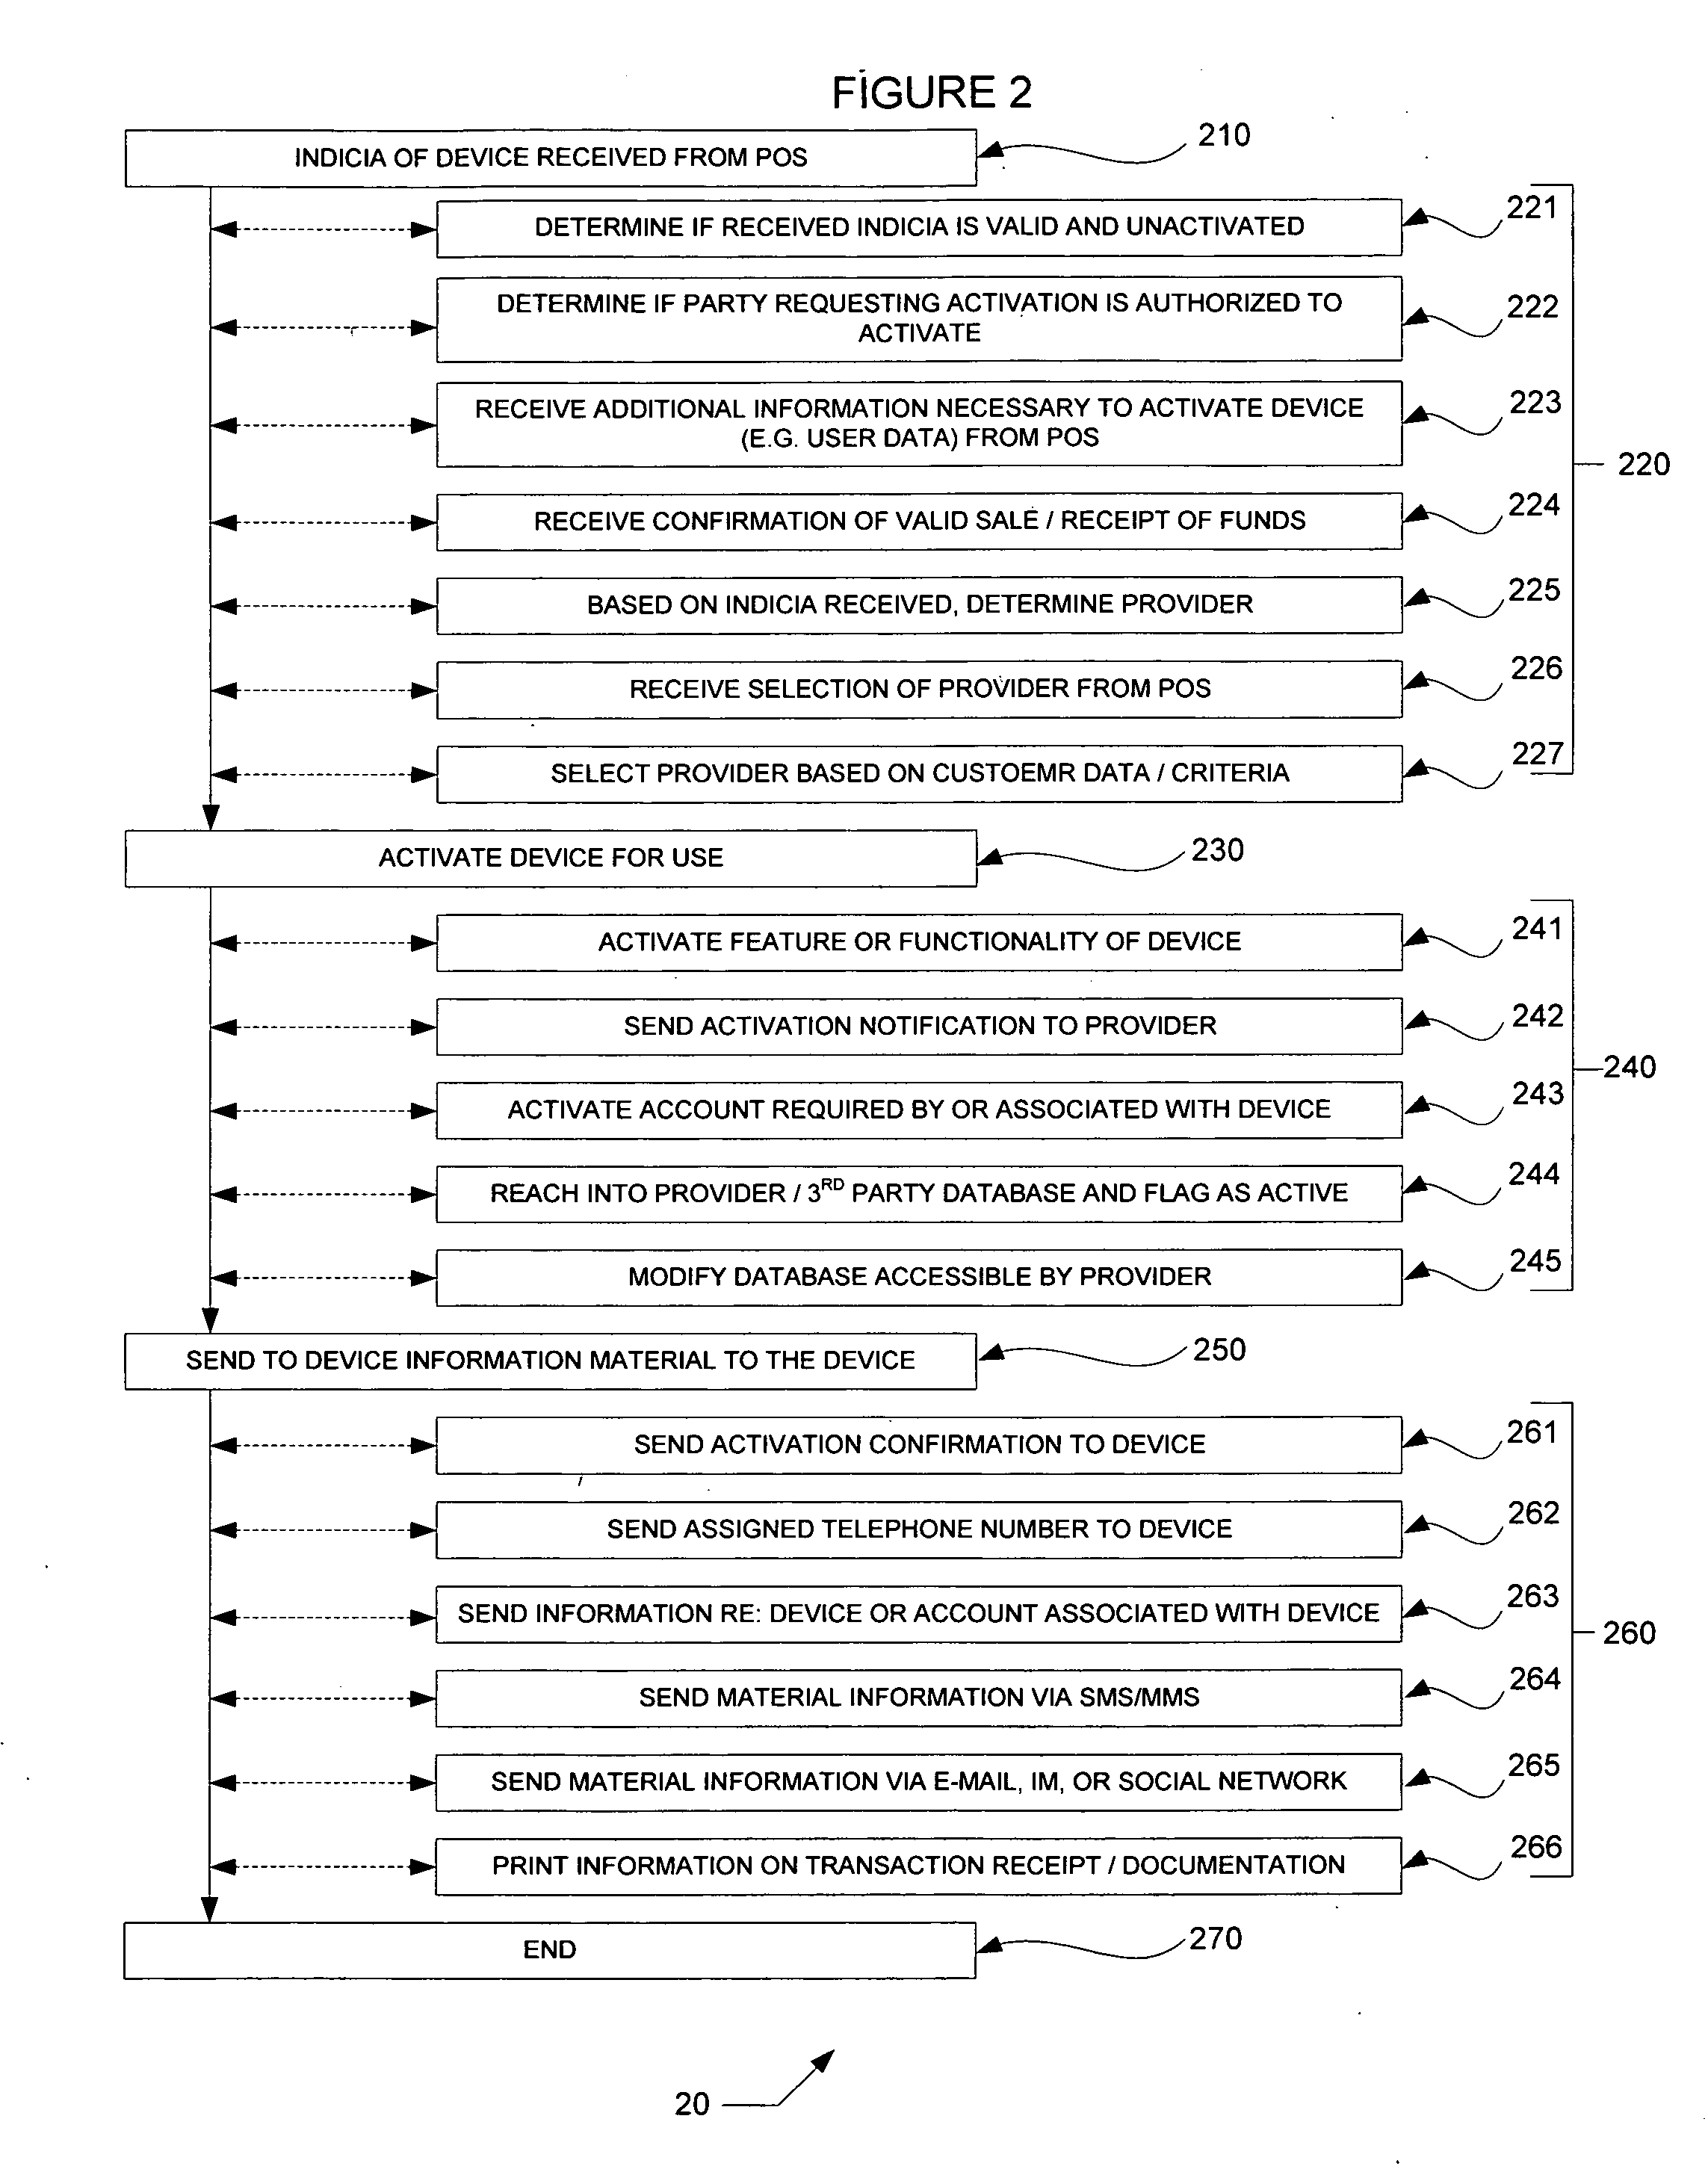 Systems and methods for electronic device point-of-sale activation